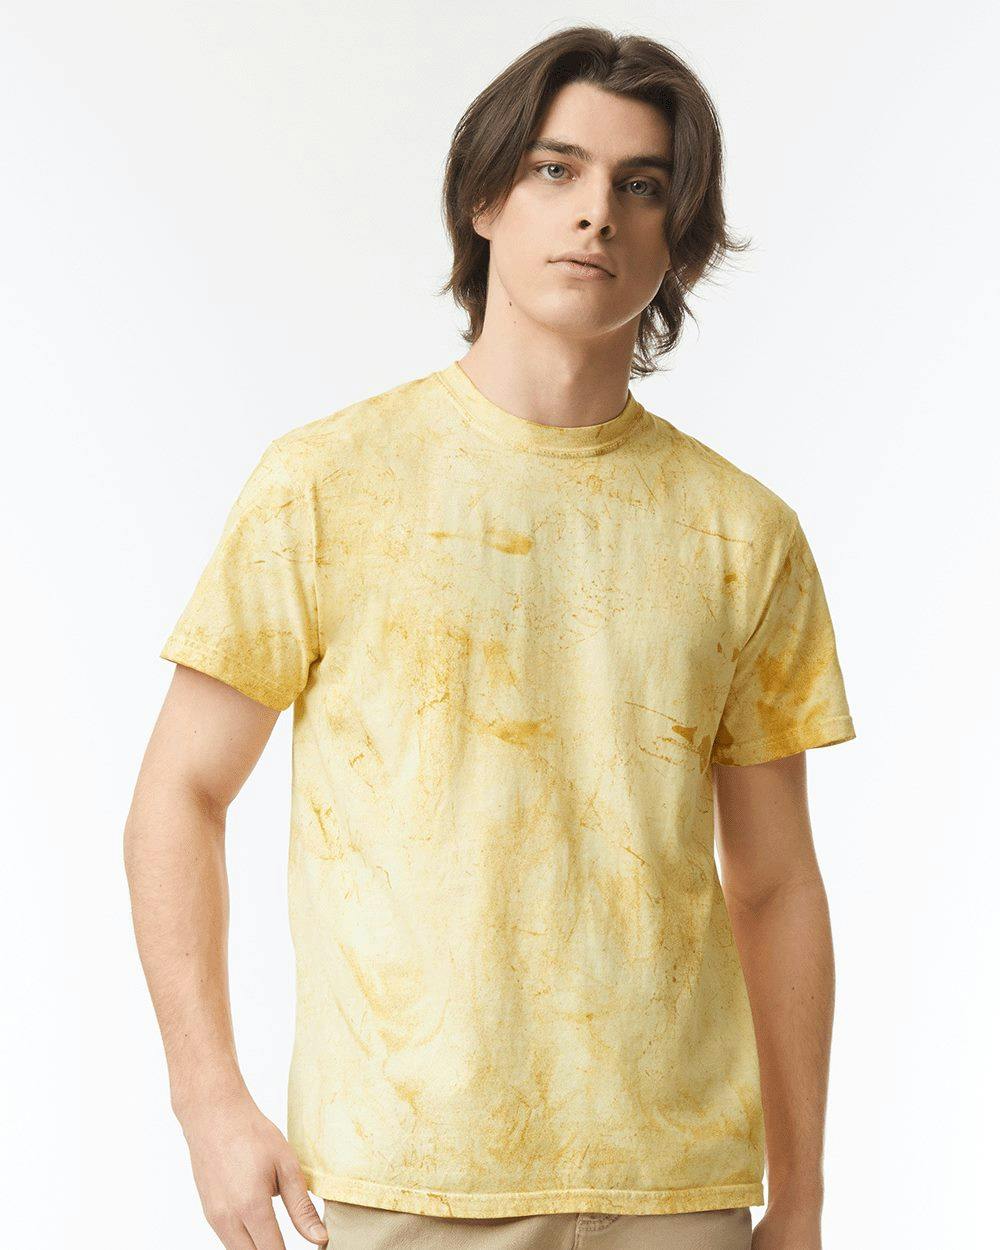 Image for Colorblast Heavyweight T-Shirt - 1745